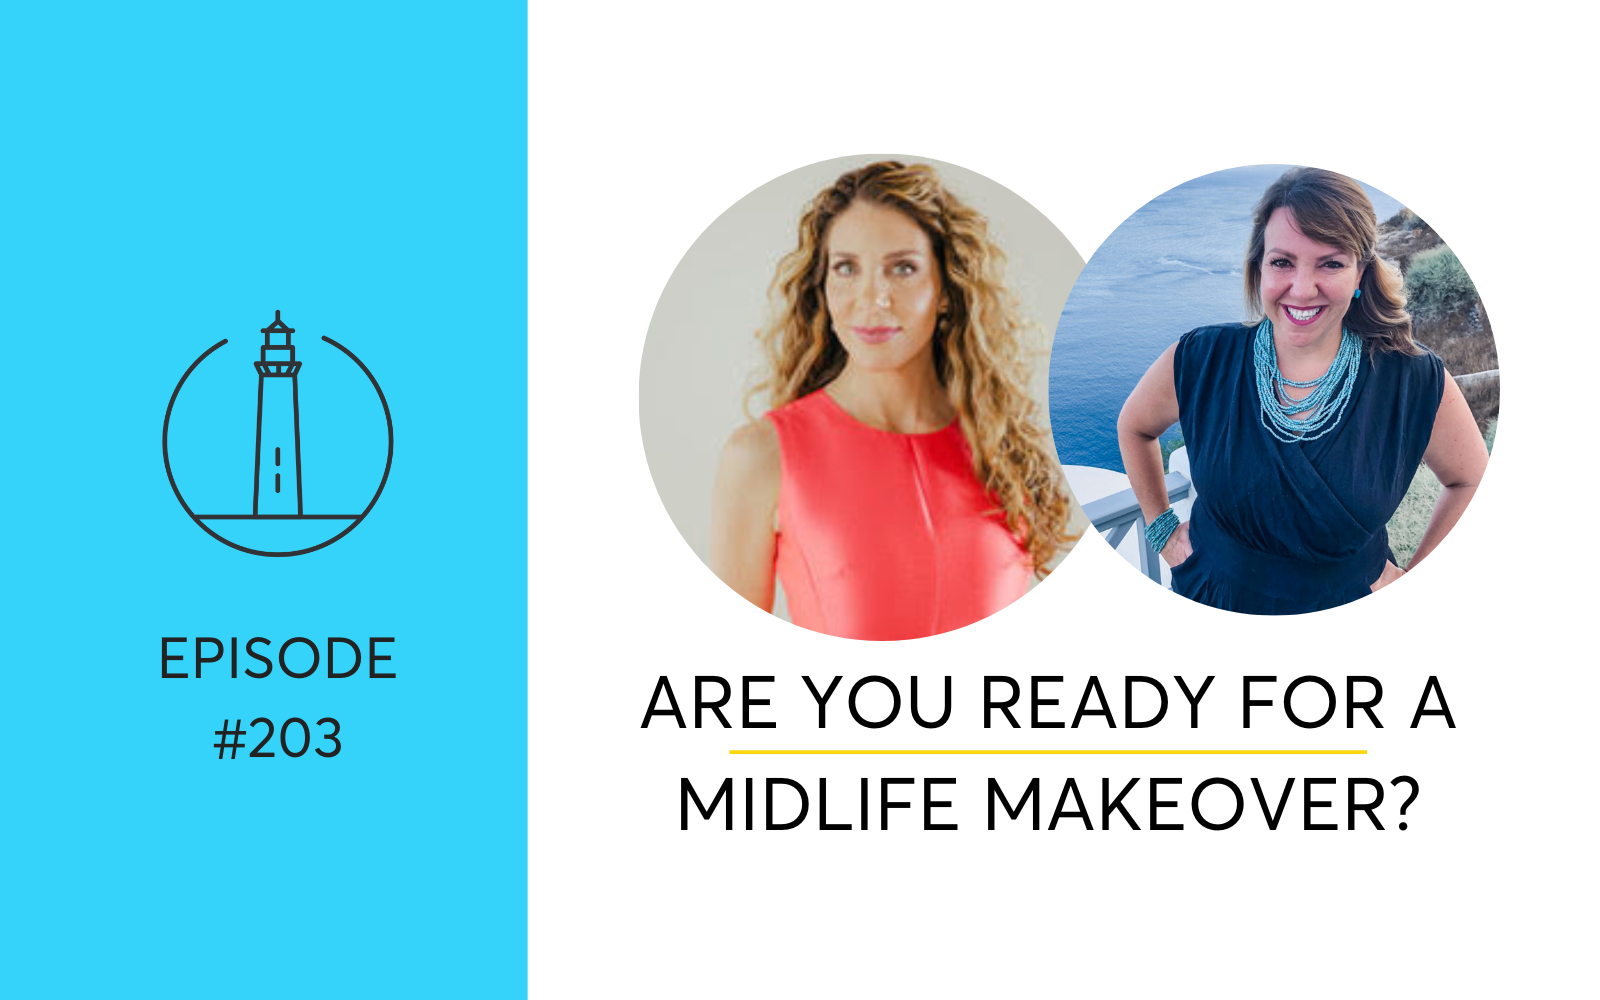 Level Up Your Life With A Midlife Makeover